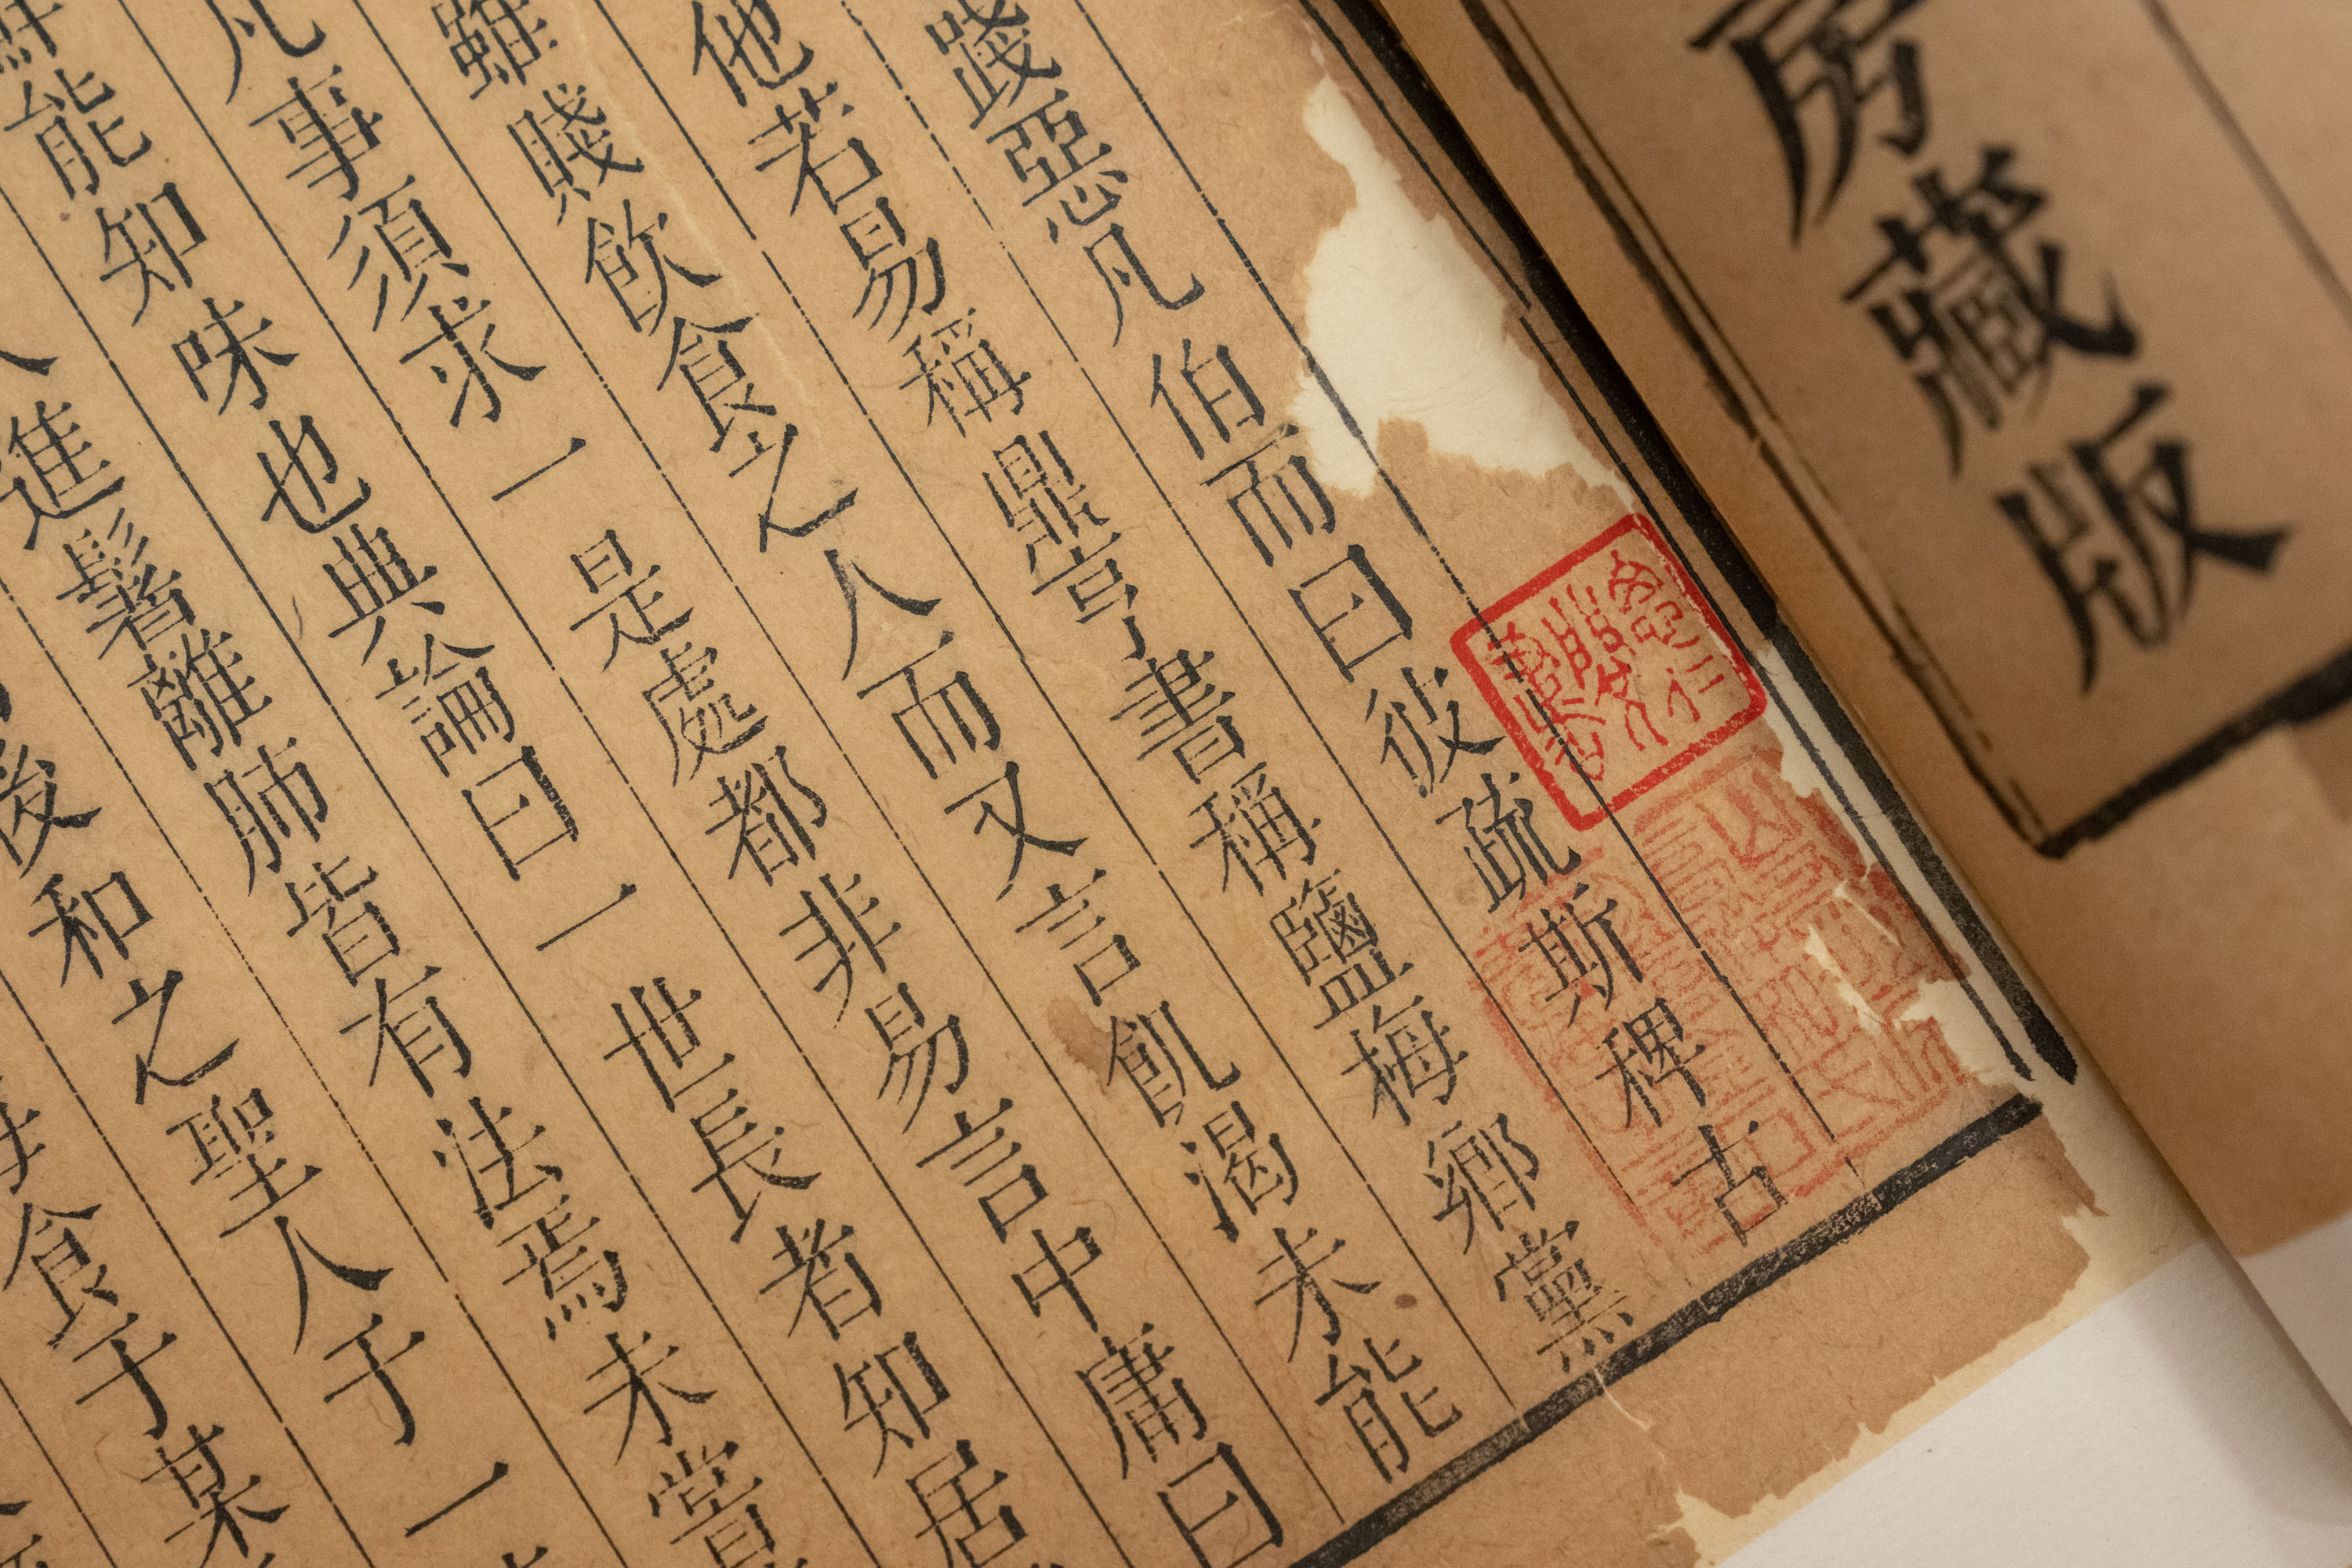 Chinese Writing in a book with a red box around one character